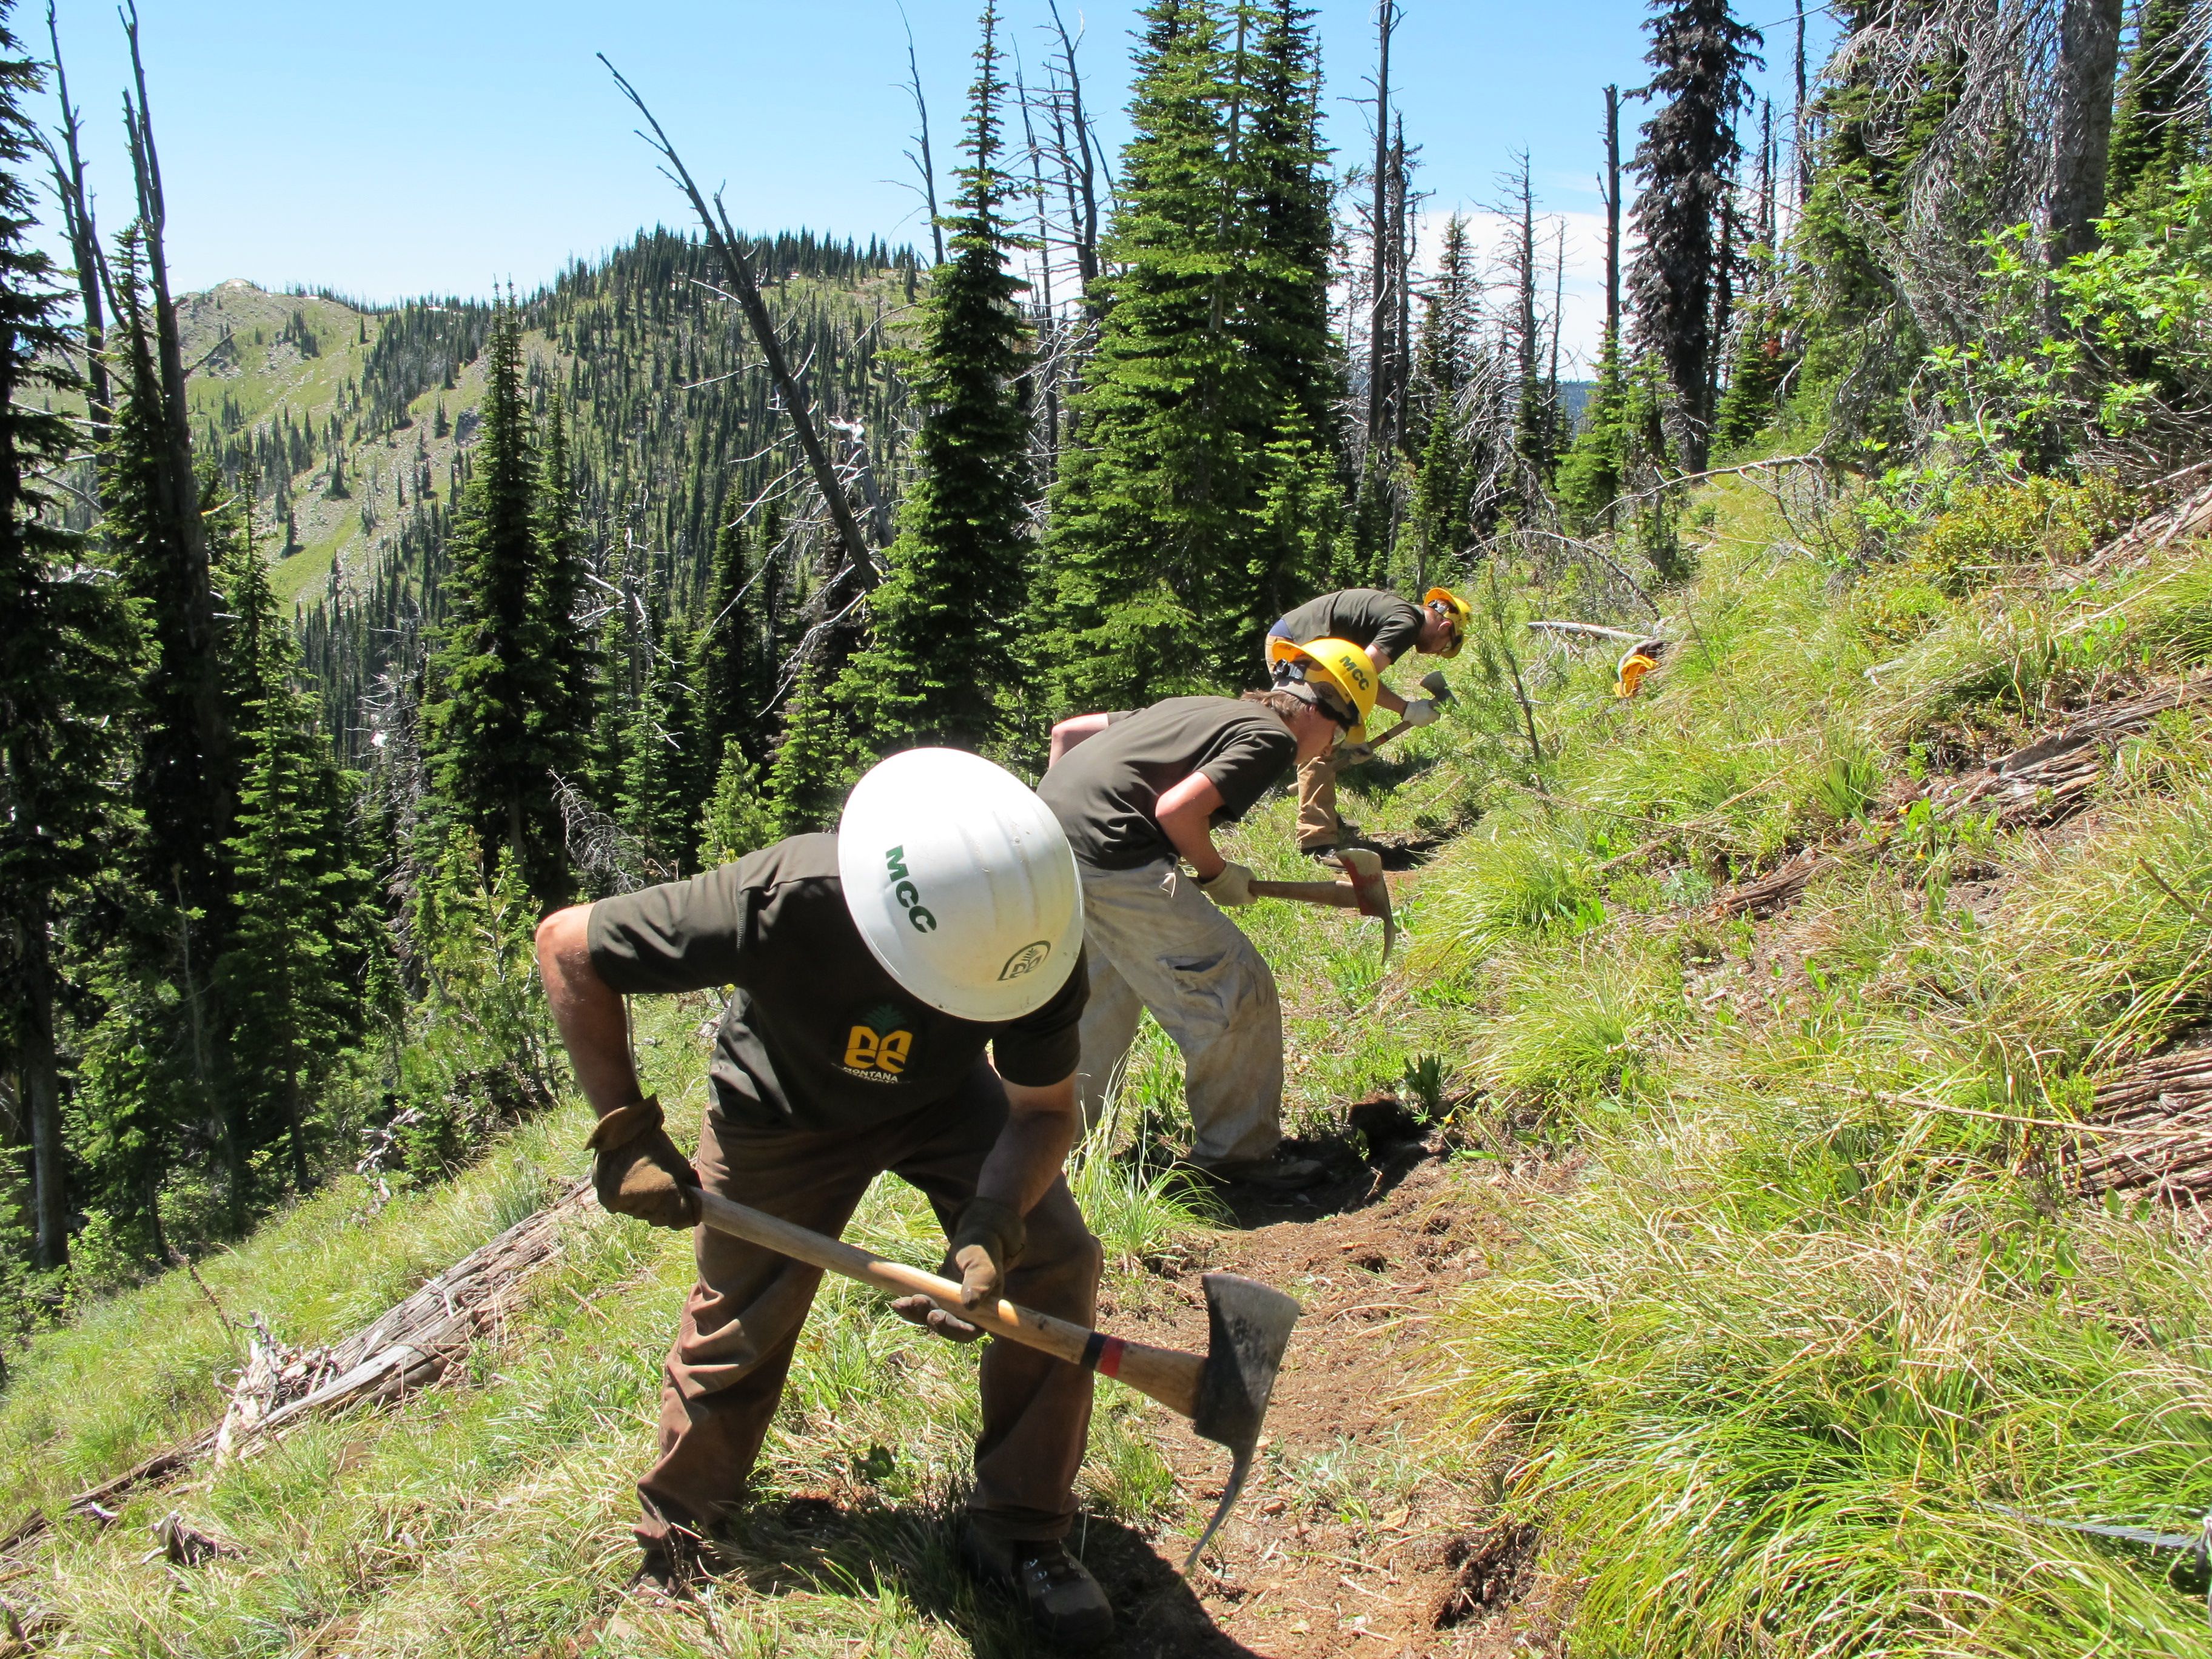 [Image Description: Three MCC members, working together on a trail on a sunny day. The members are in sync, using their trail tools in a coordinated effort to improve the trail.]